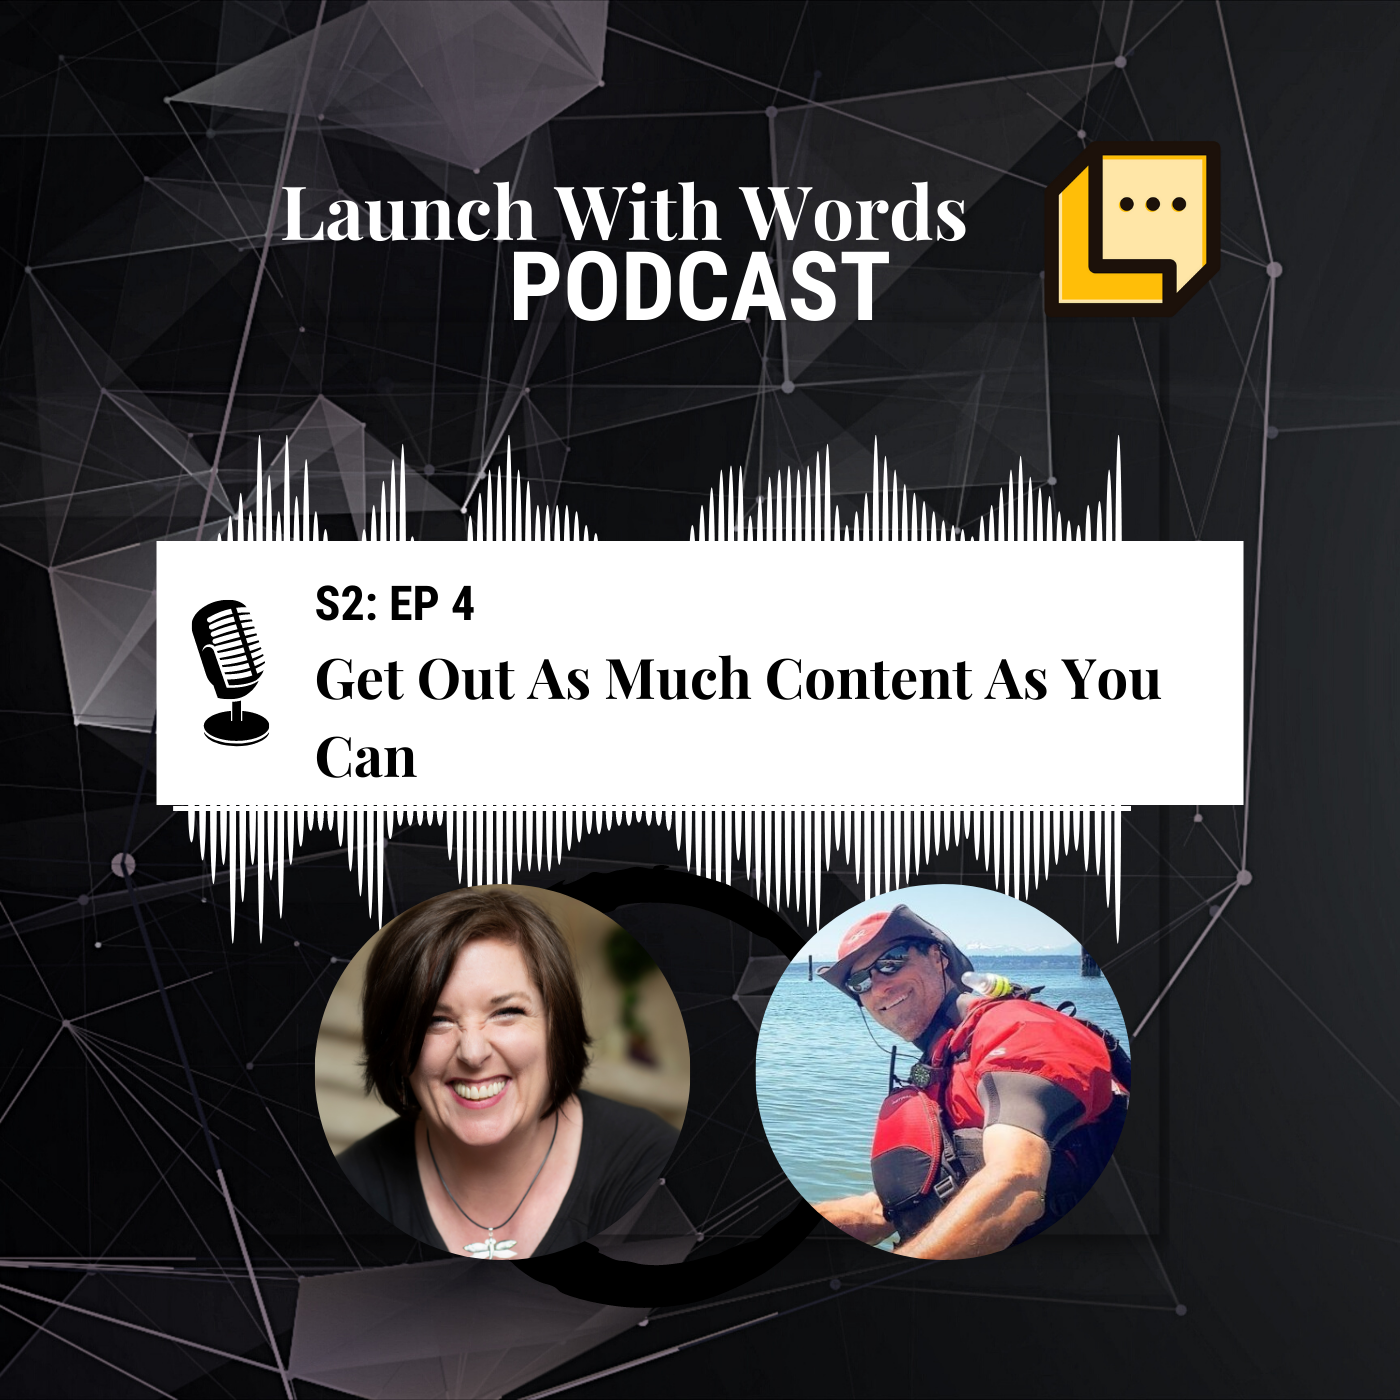 Get Out As Much Content As You Can with Robert Nissenbaum